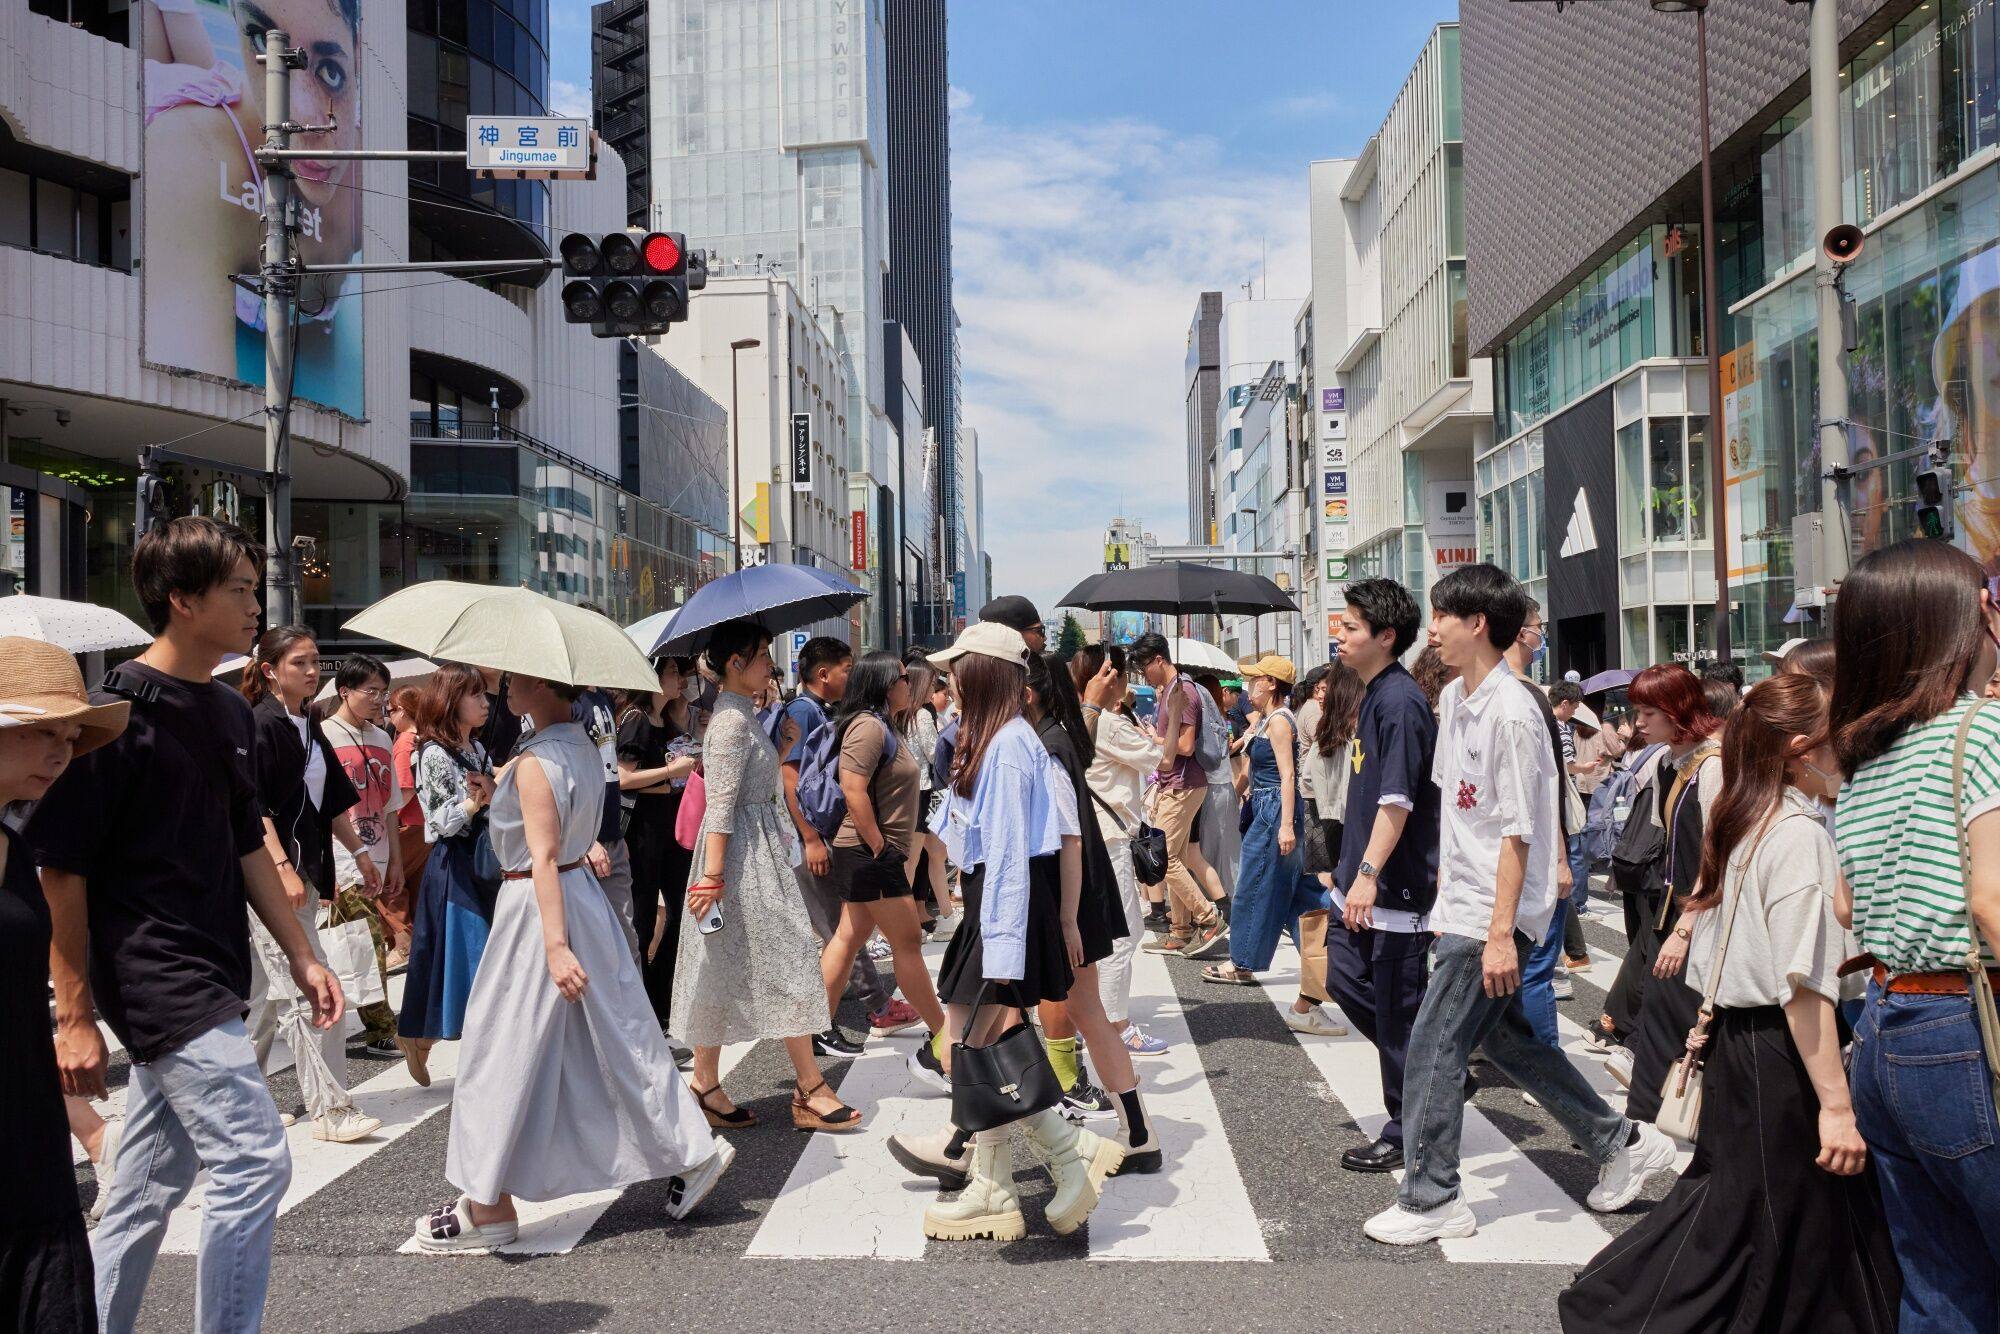 People cross a street in a Tokyo shopping district on Saturday. Roughly 27 million people in Japan are millennials, defined as those born between 1981 to 1996. Photo: Bloomberg